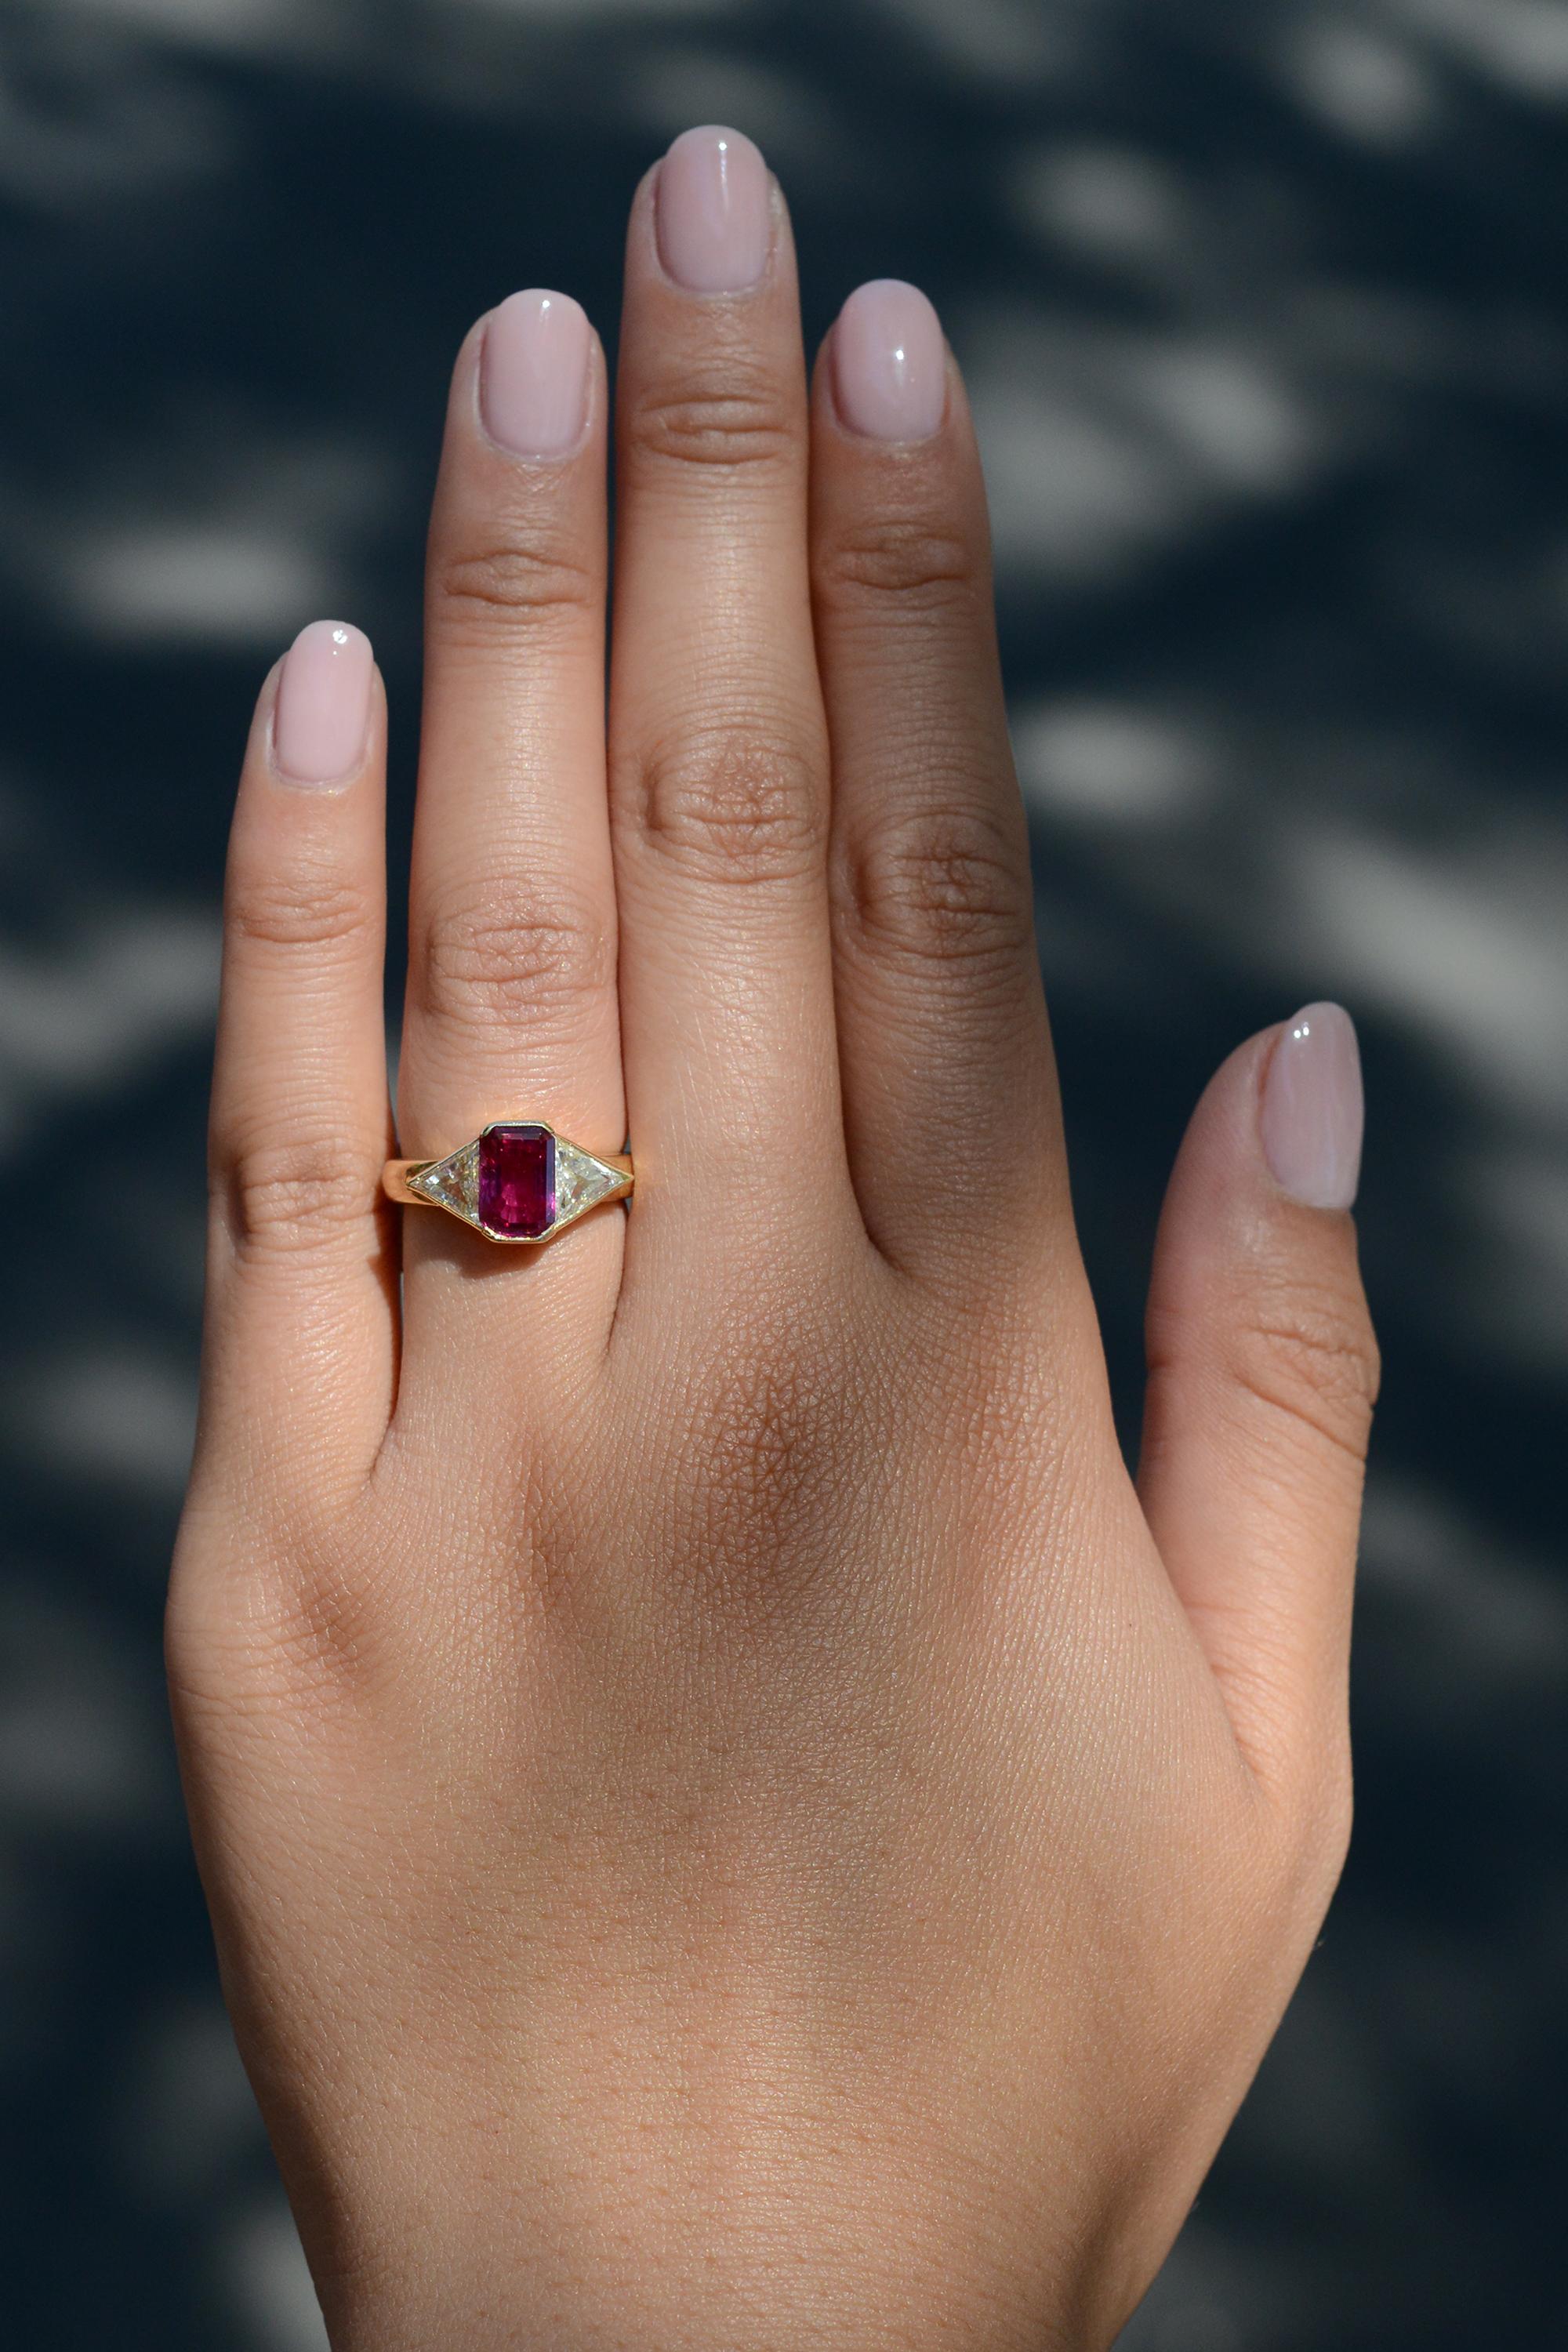 This classic 1980s vintage gemstone engagement ring is centered by a fantastic octagonal ruby, certified by the prestigious Swiss GRS laboratory and weighing over 2 carats. A classic 3 stone composition with a buttery, 18 karat yellow gold mount